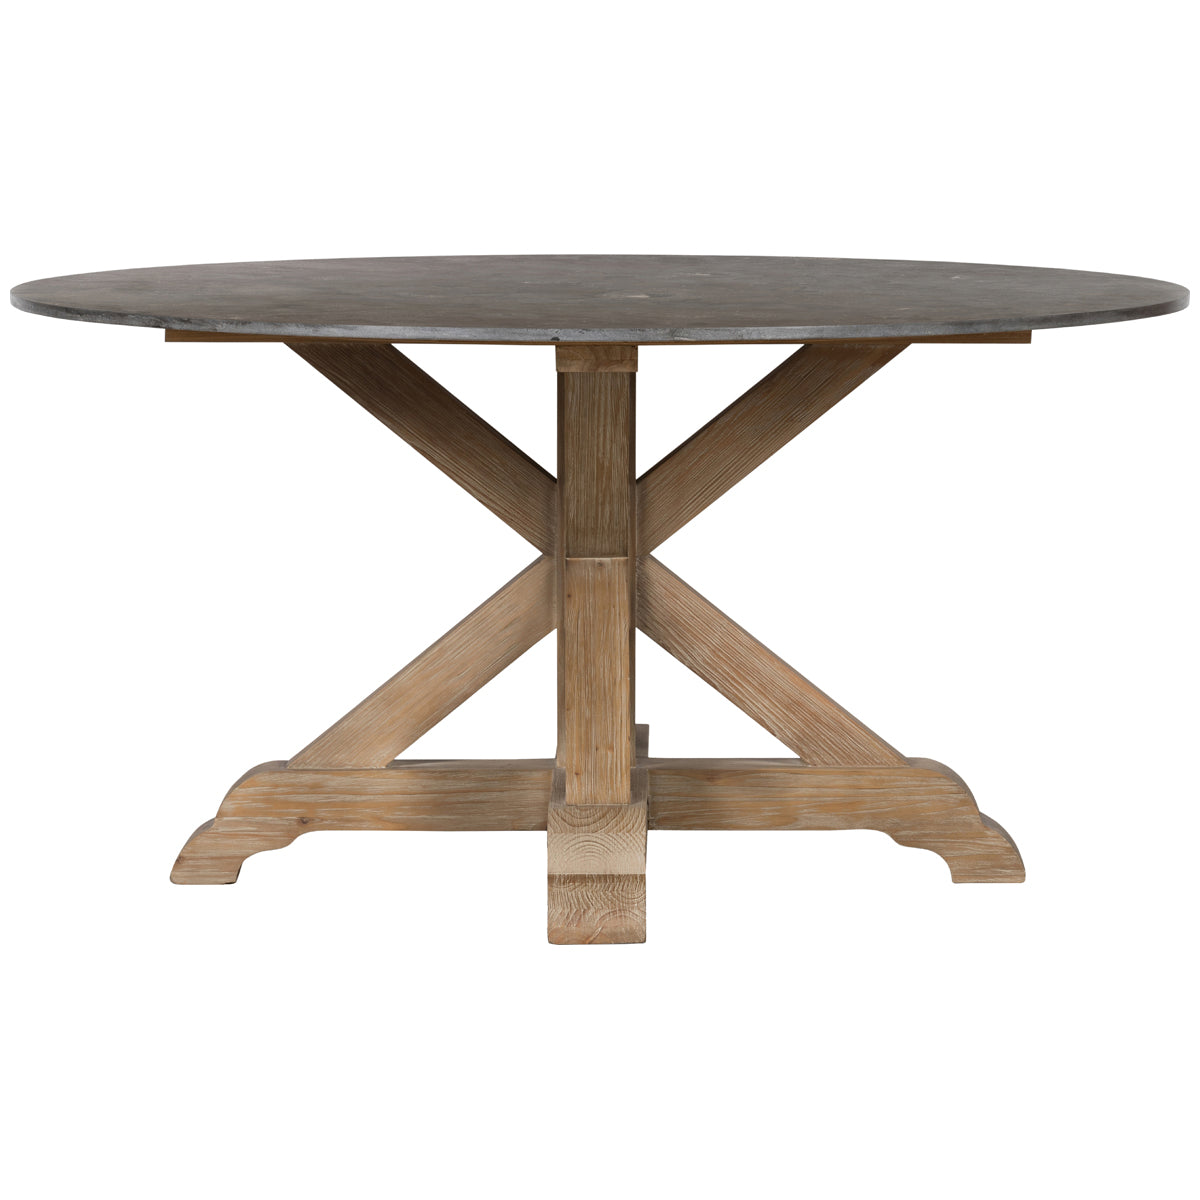 Four Hands Collins Pallas Dining Table - New Pine